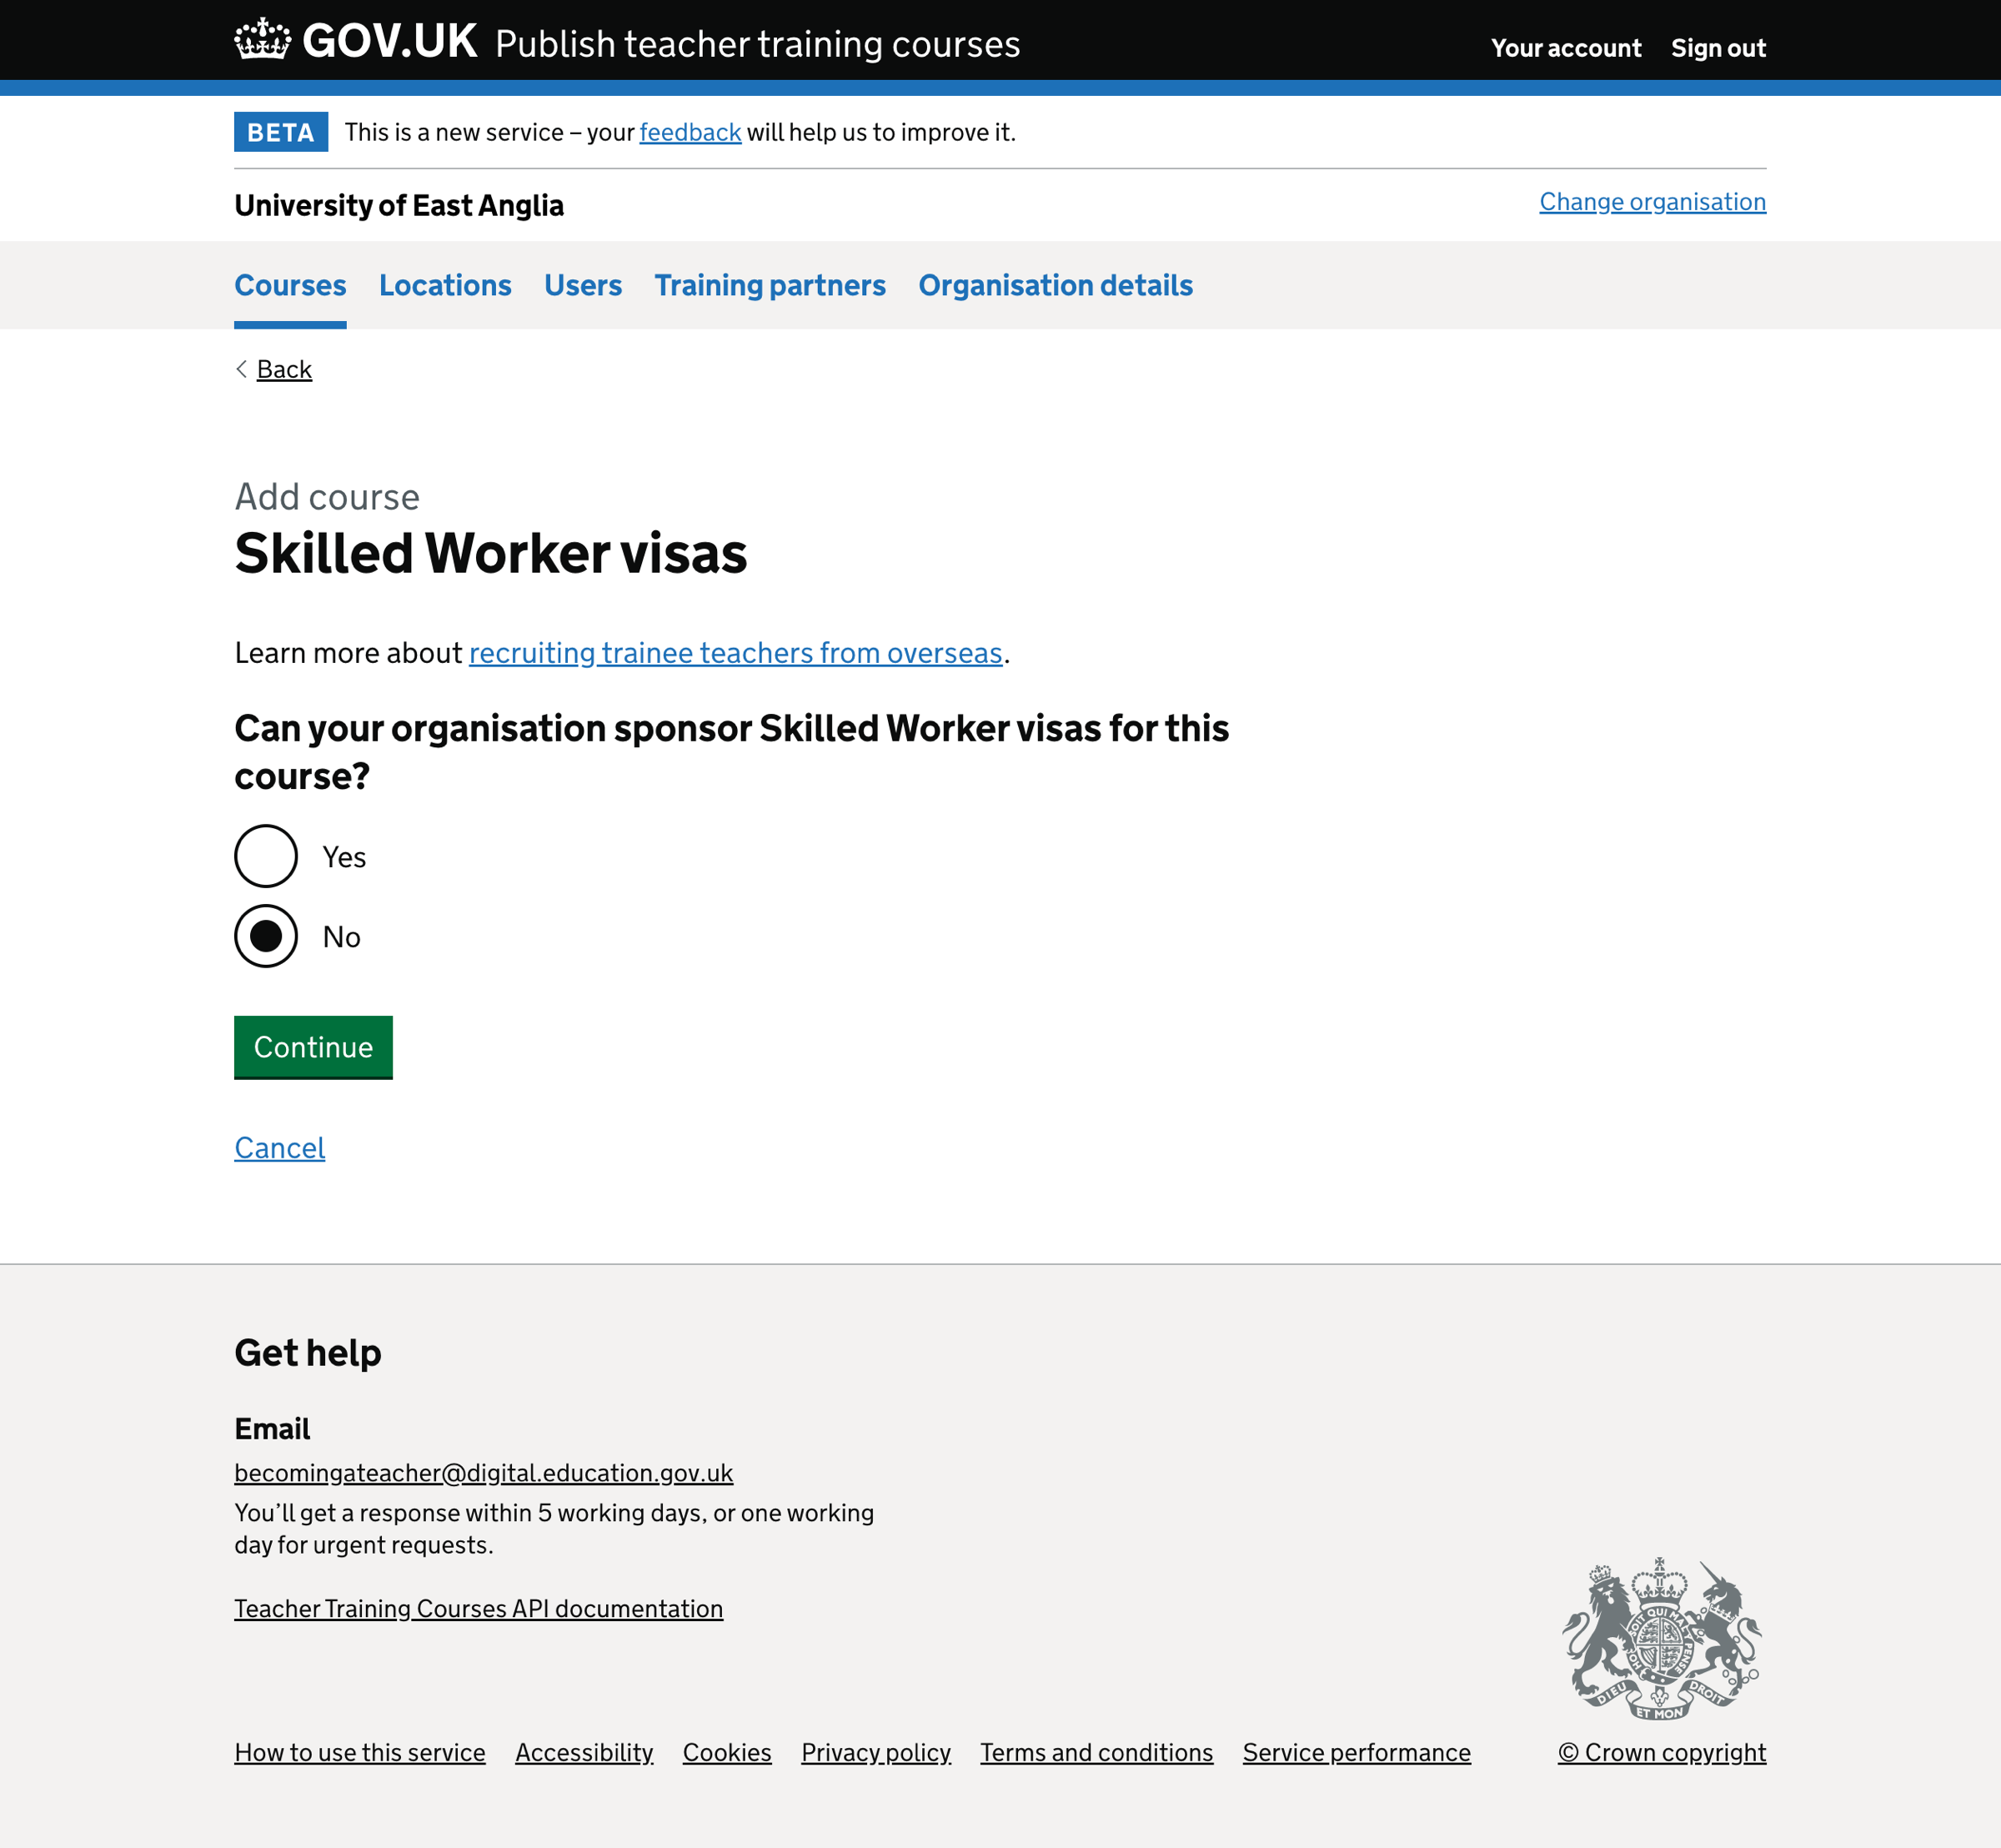 Screenshot of Add course - accredited body - Skilled Worker visas